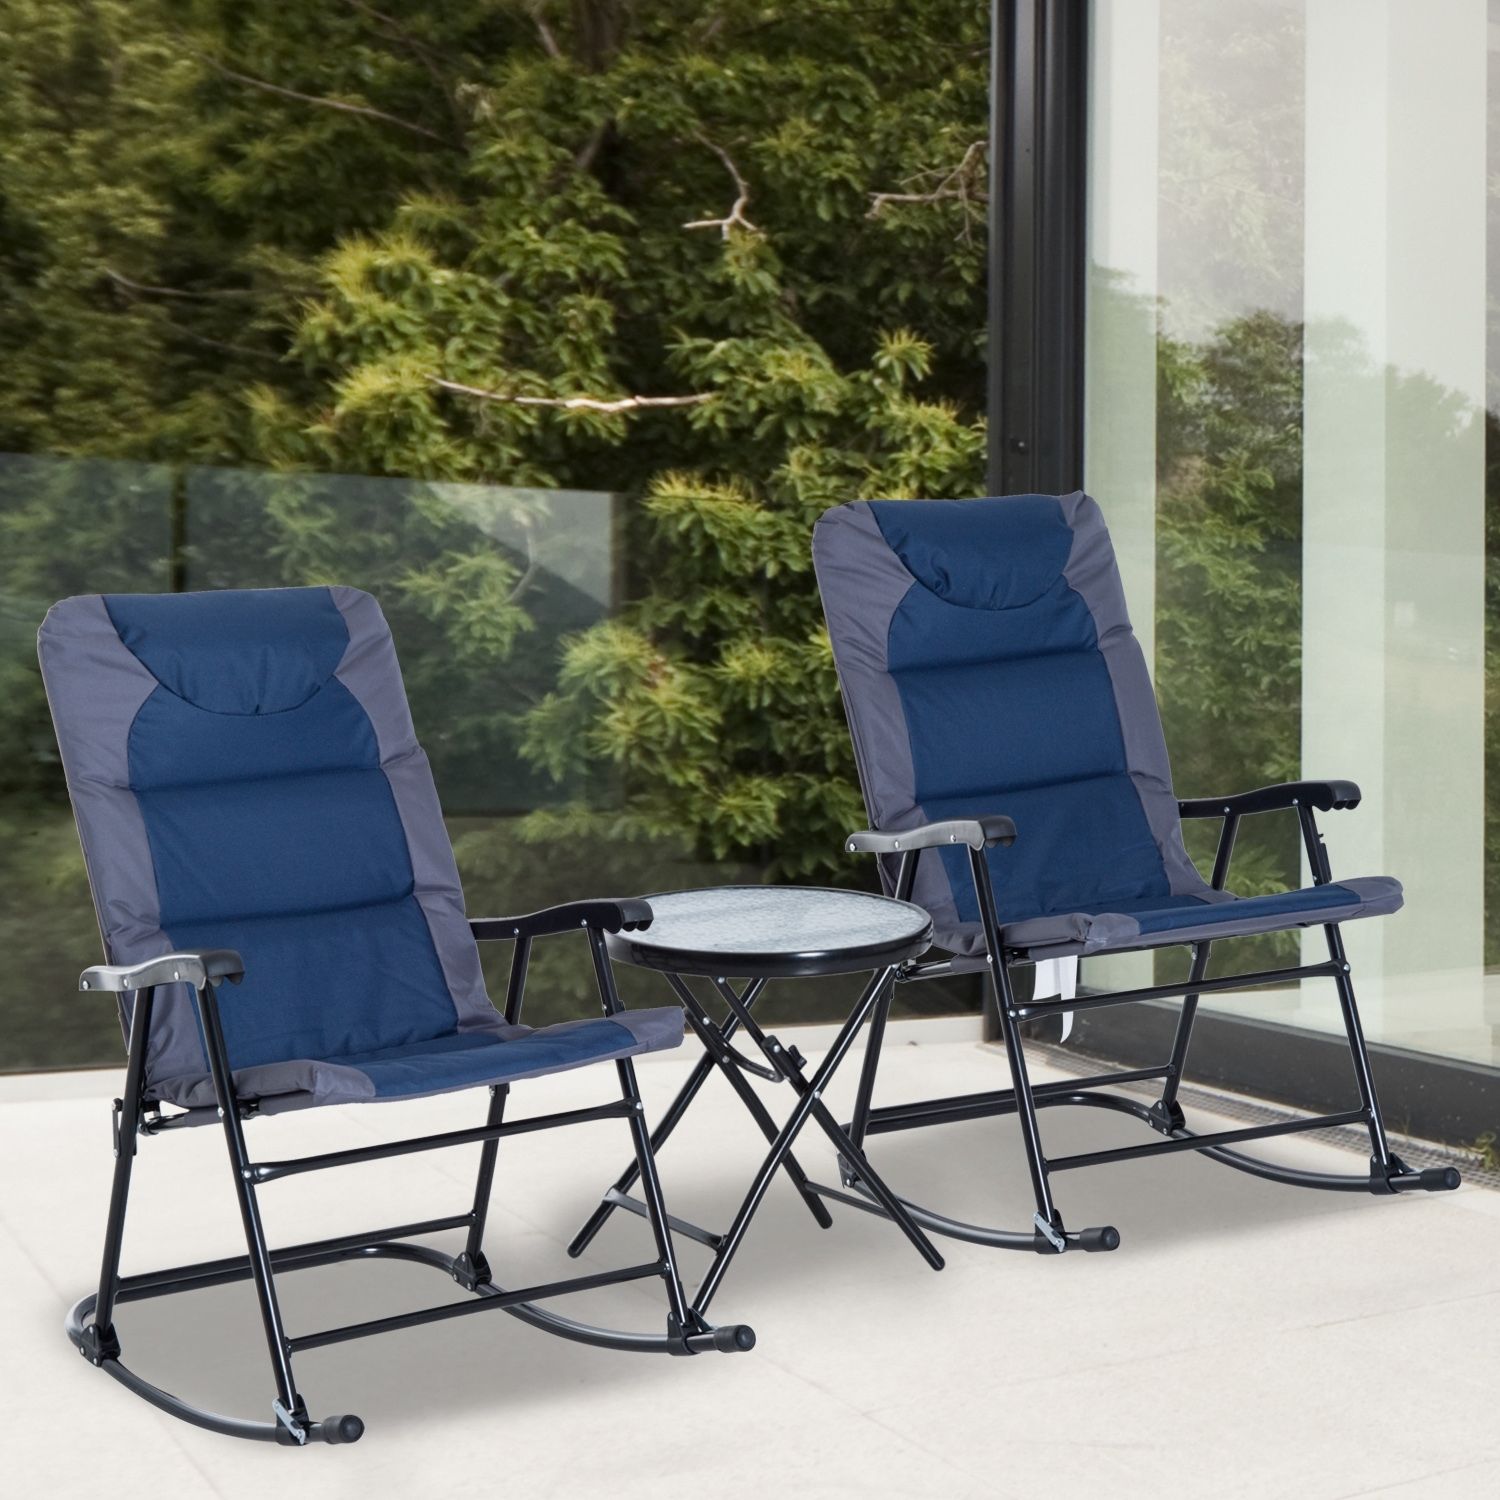 Outsunny 3 Piece Folding Outdoor Rocking Chair And Table Set Patio Pertaining To Patio Rocking Chairs And Table (Photo 12 of 15)